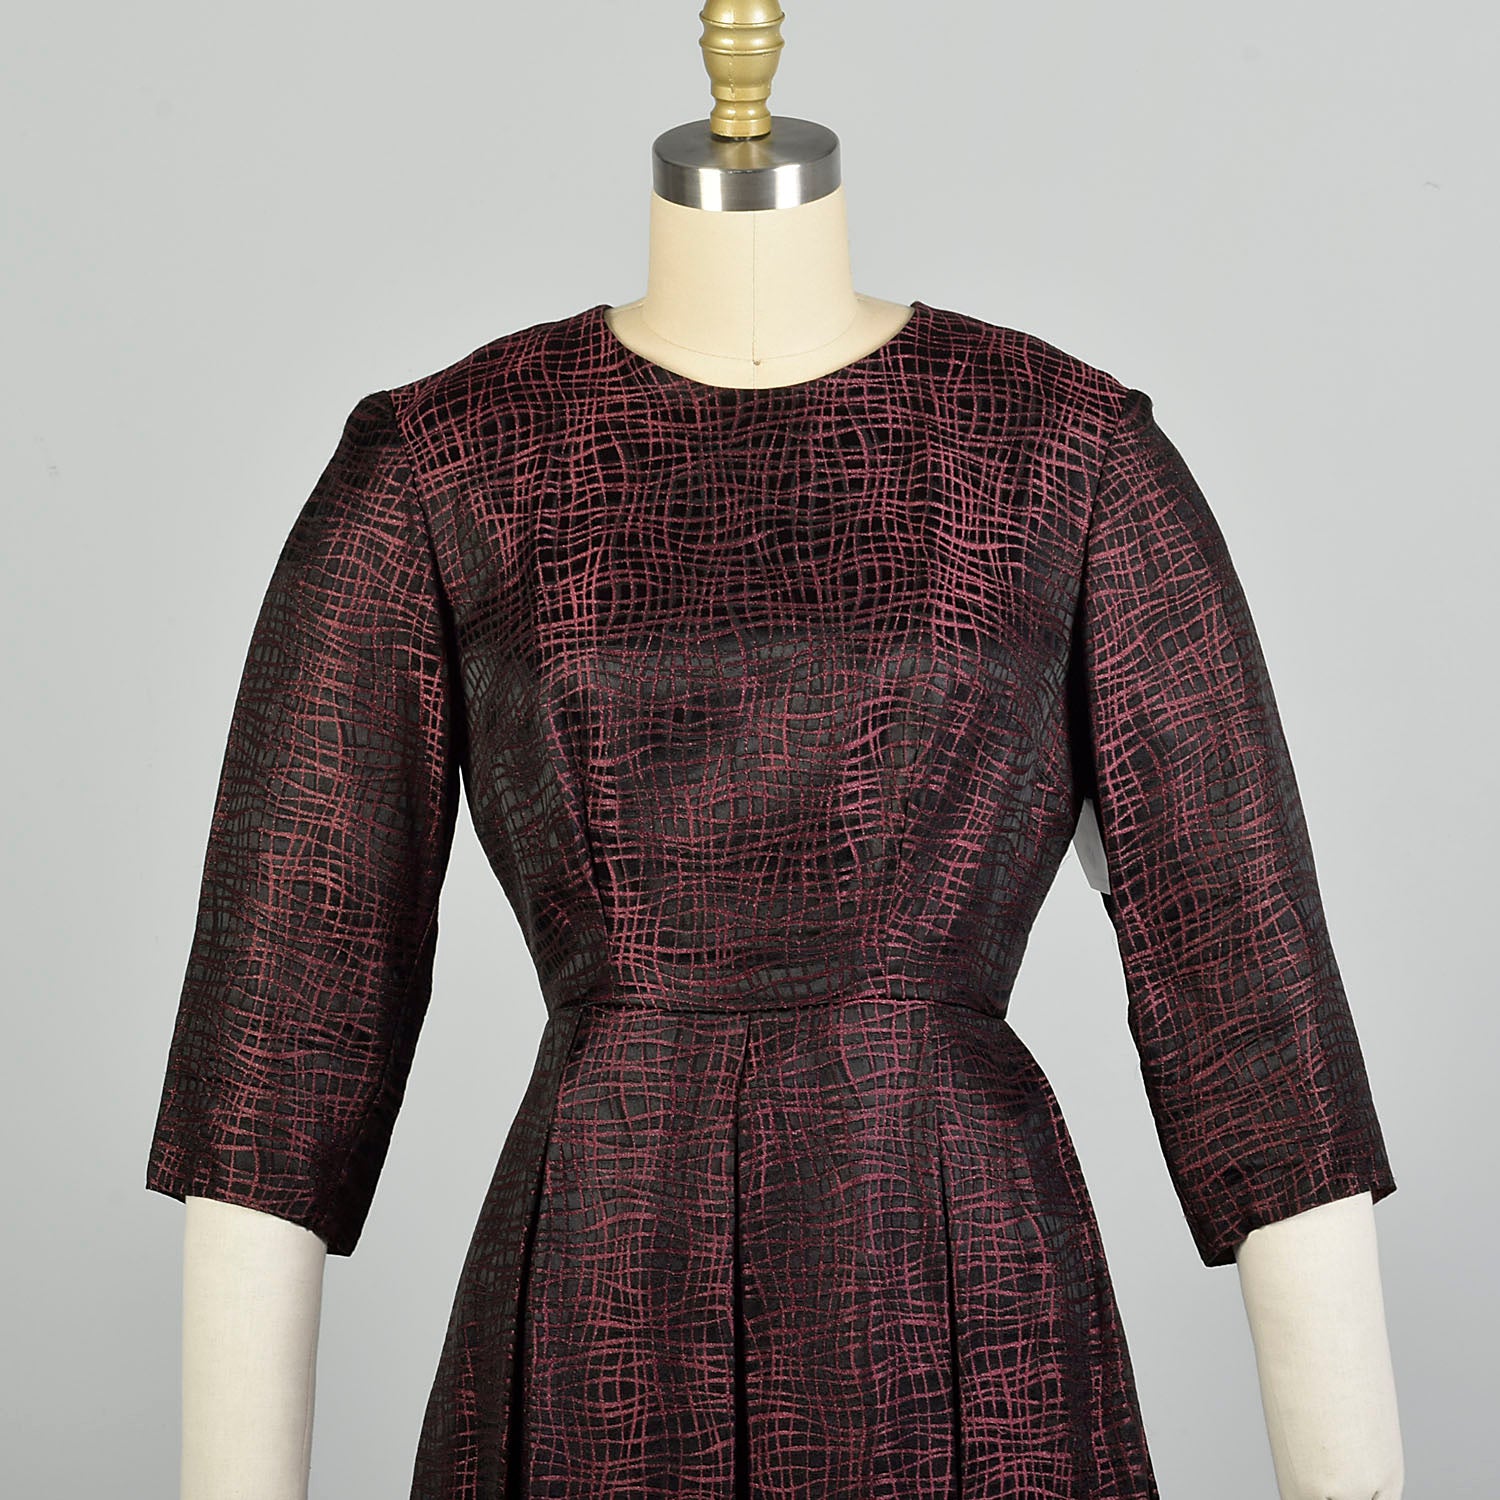 Small 1950s Abstract Textured Cocktail Dress Black Pink Metallic Elbow Sleeve Pleated Skirt